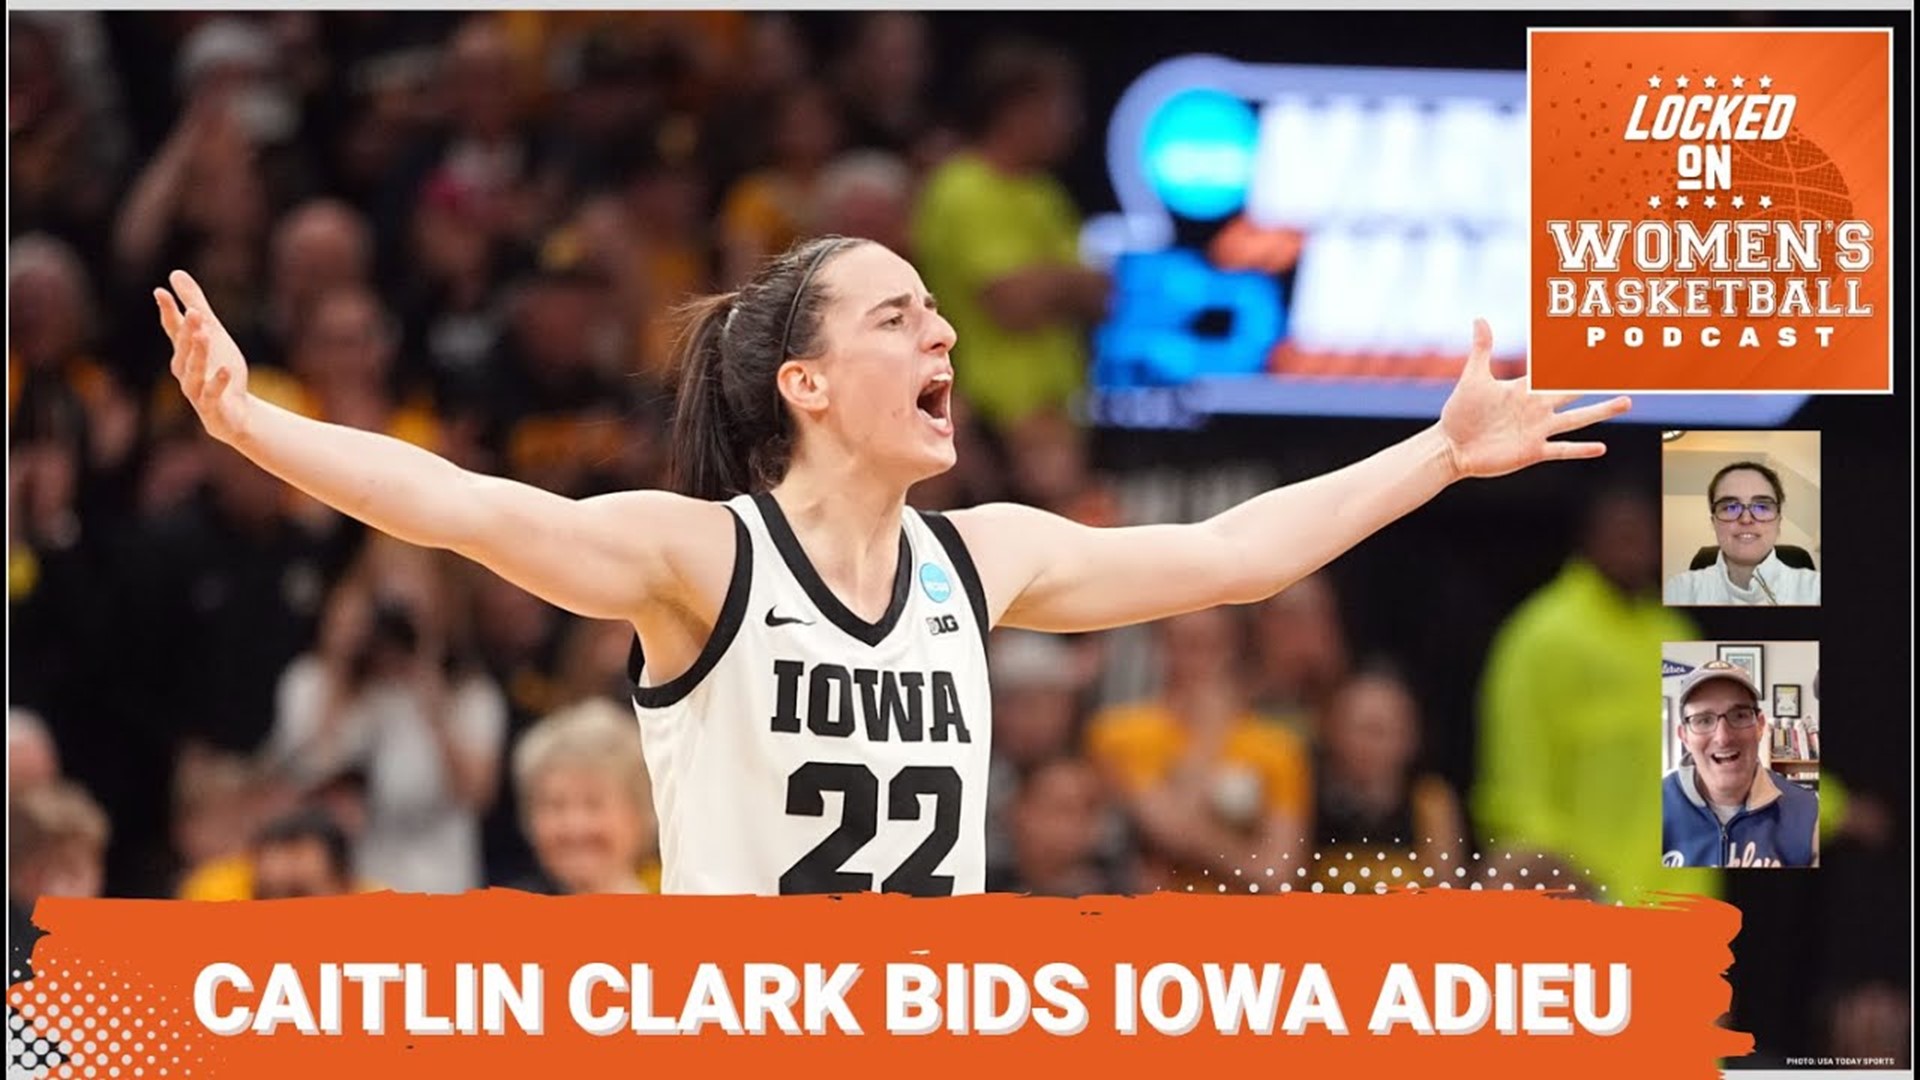 Caitlin Clark played her final game at Carver-Hawkeye Arena, and The Next's Jenn Hatfield was there to cover it.